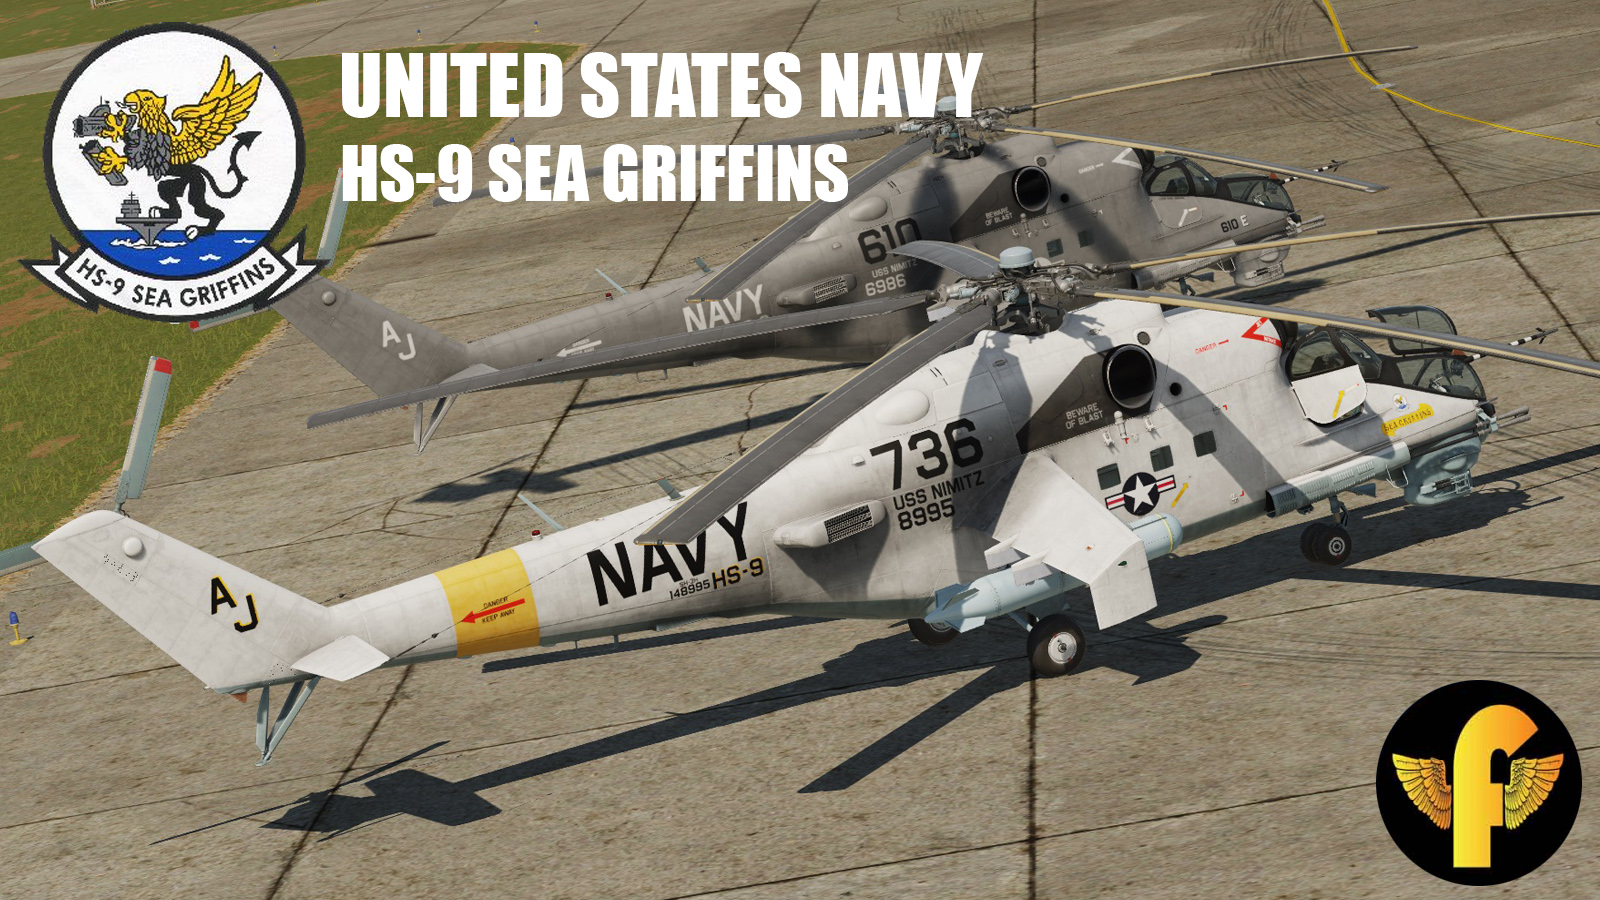 HS-9 Sea Griffins SH-3H and Clean US Navy Fictive